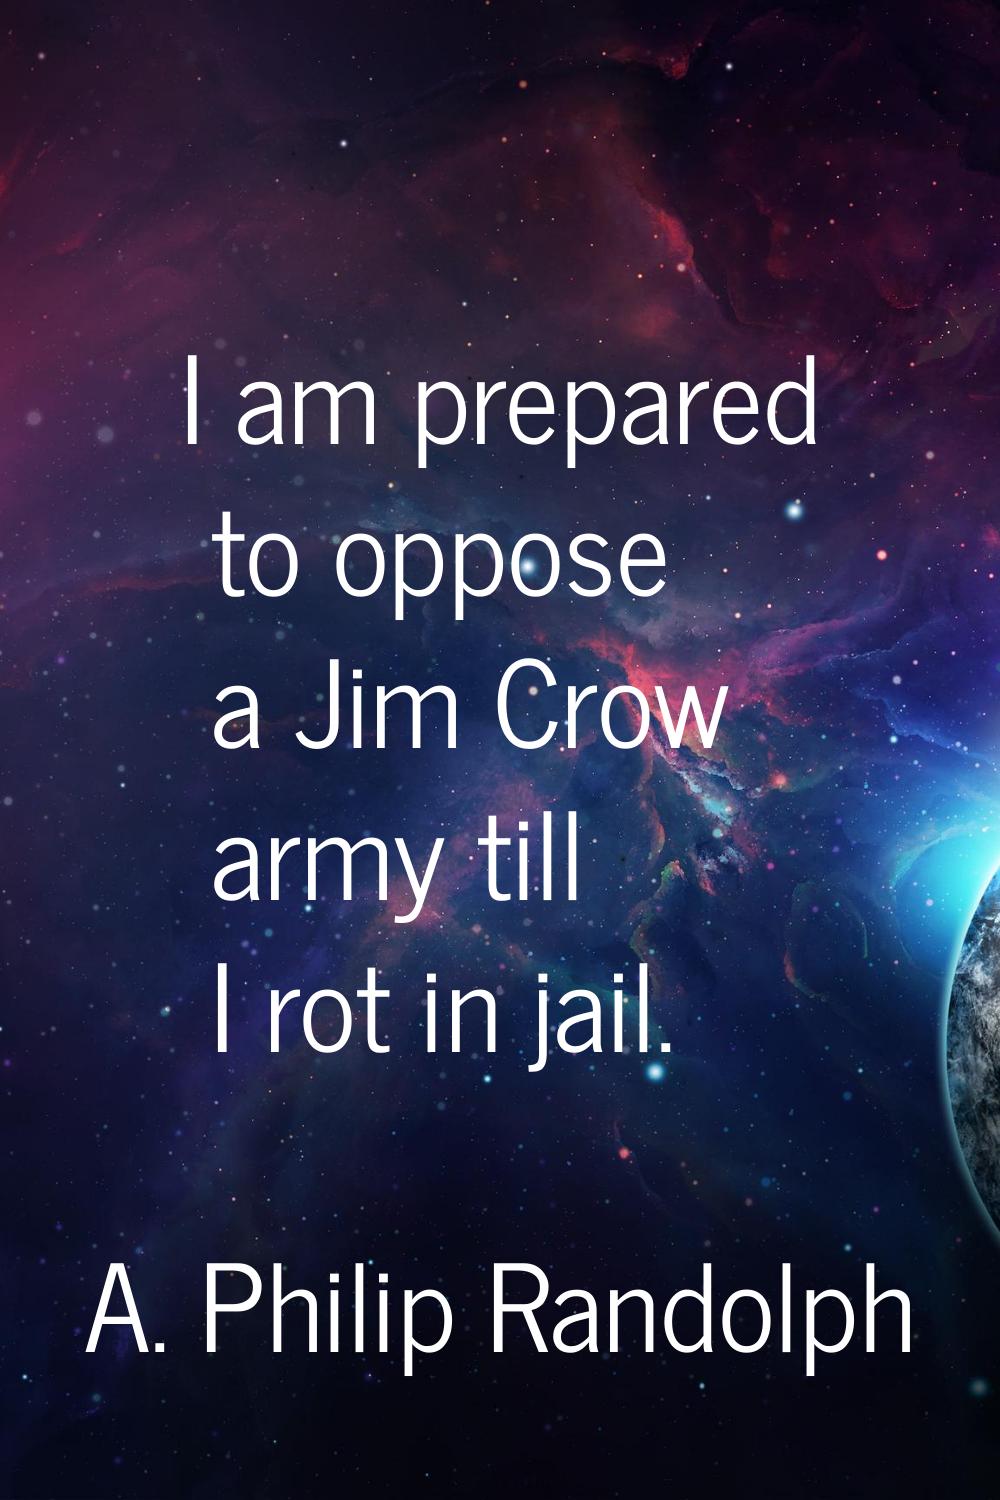 I am prepared to oppose a Jim Crow army till I rot in jail.